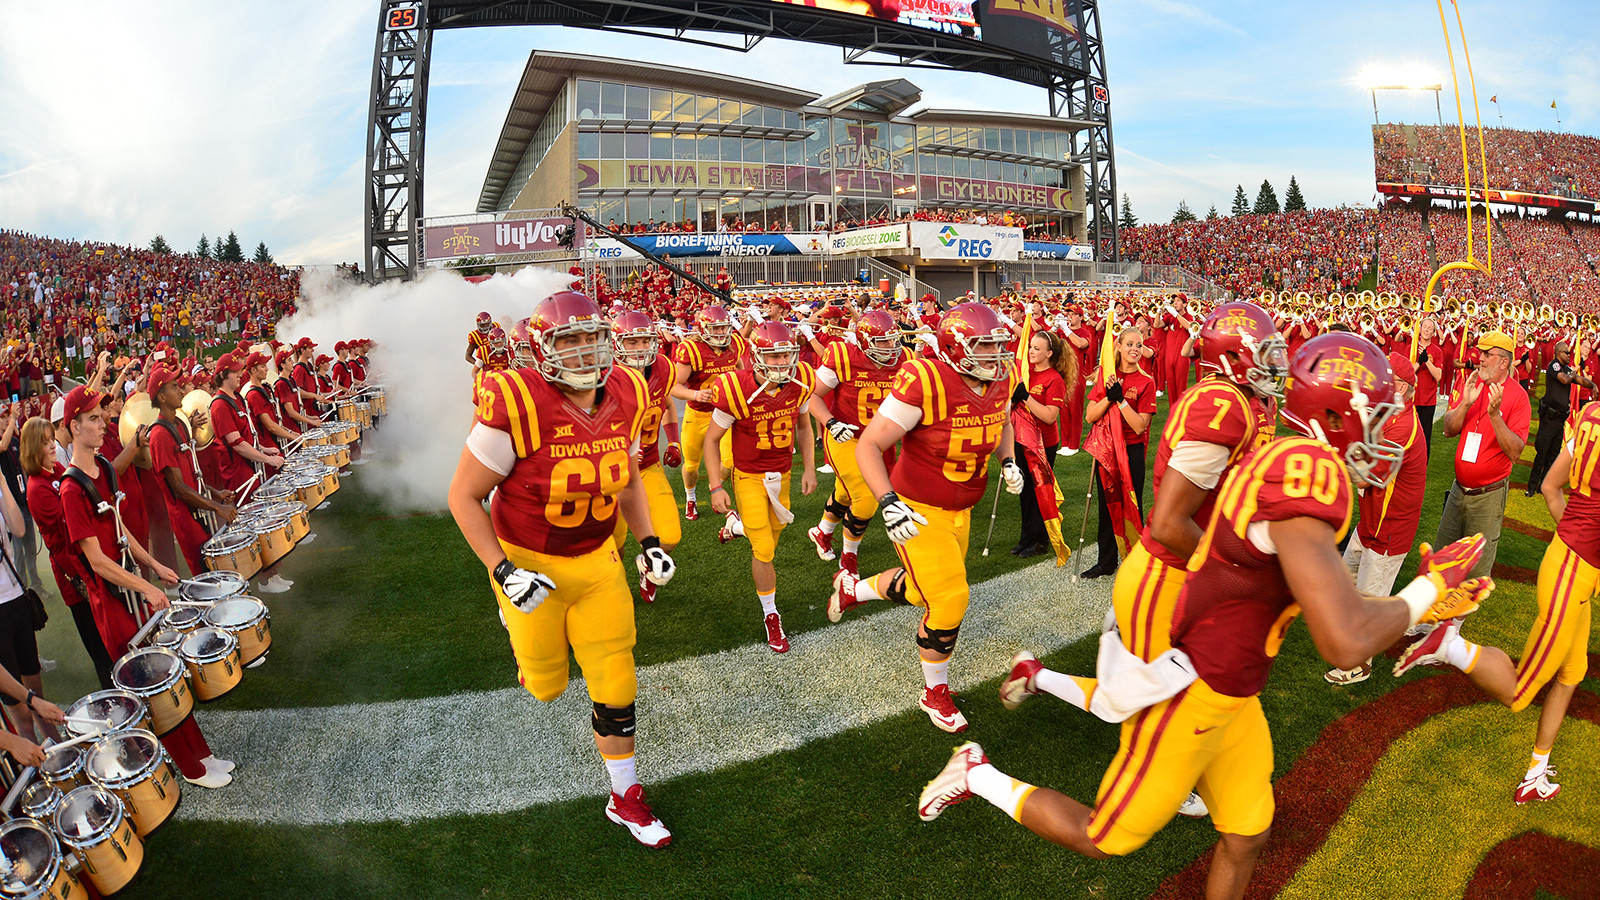 Free download 2016 Football Schedule Released Iowa State University